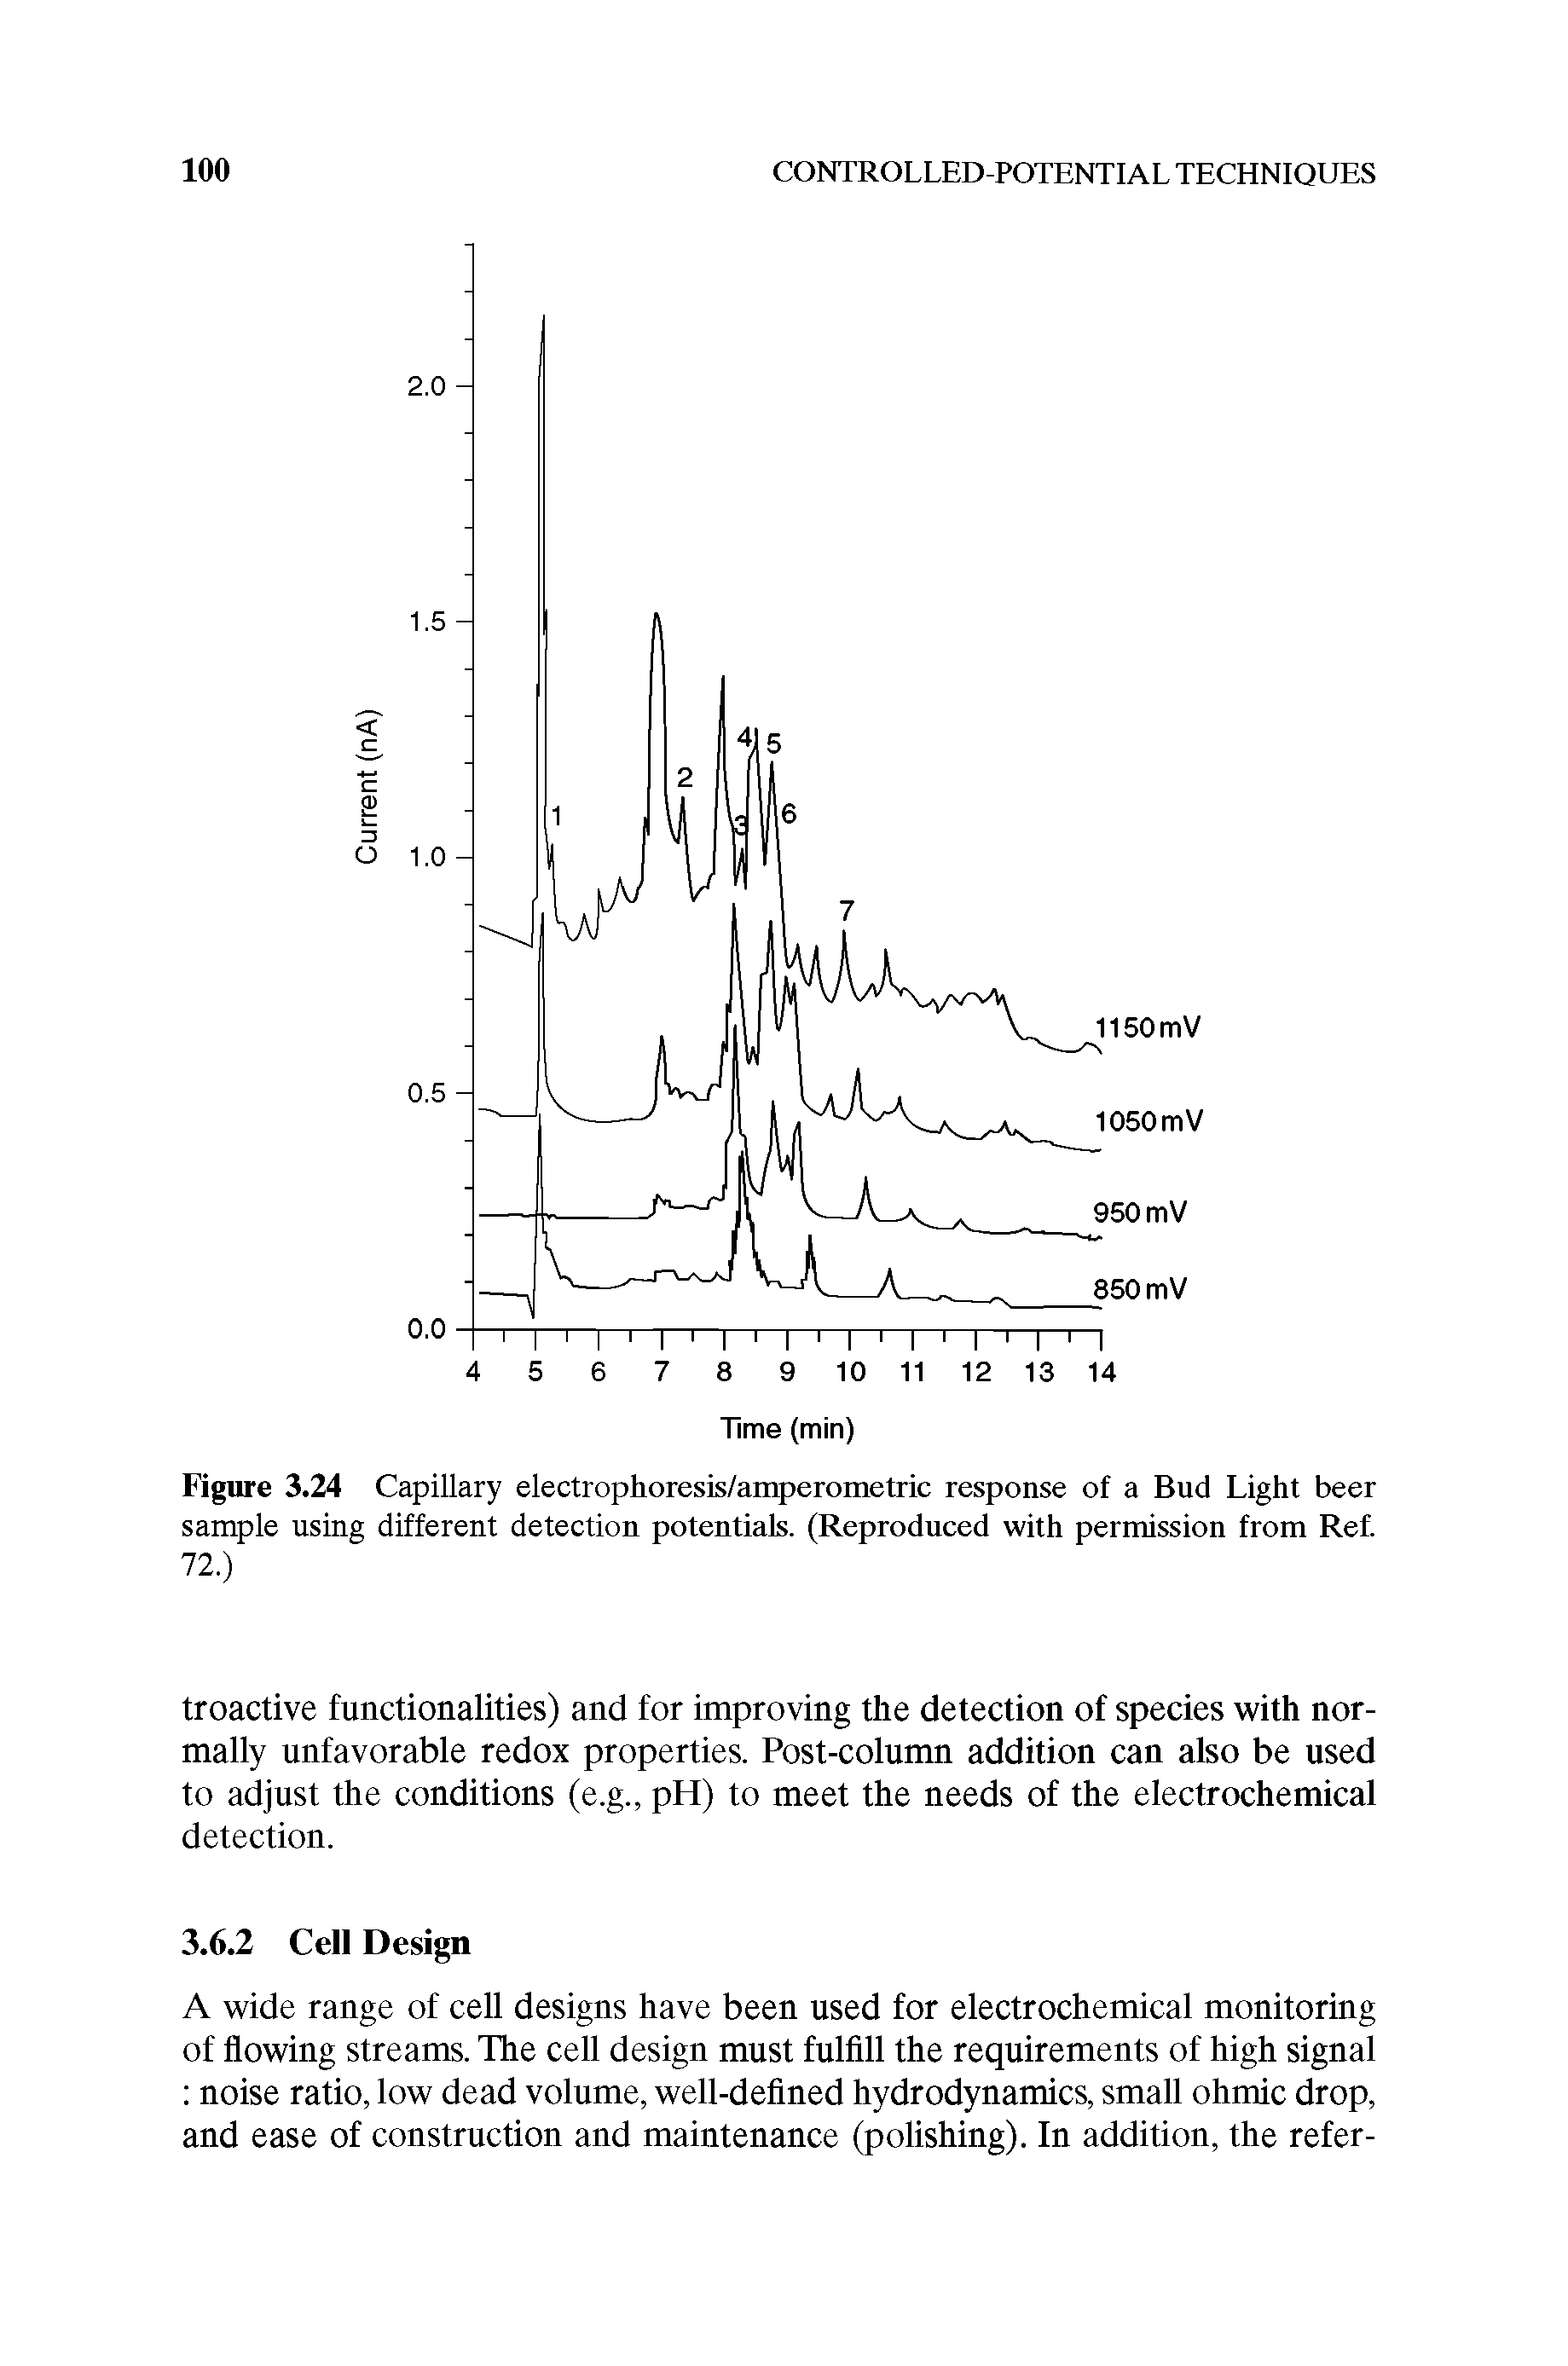 Figure 3.24 Capillary electrophoresis/amperometric response of a Bud Light beer sample using different detection potentials. (Reproduced with permission from Ref. 72.)...